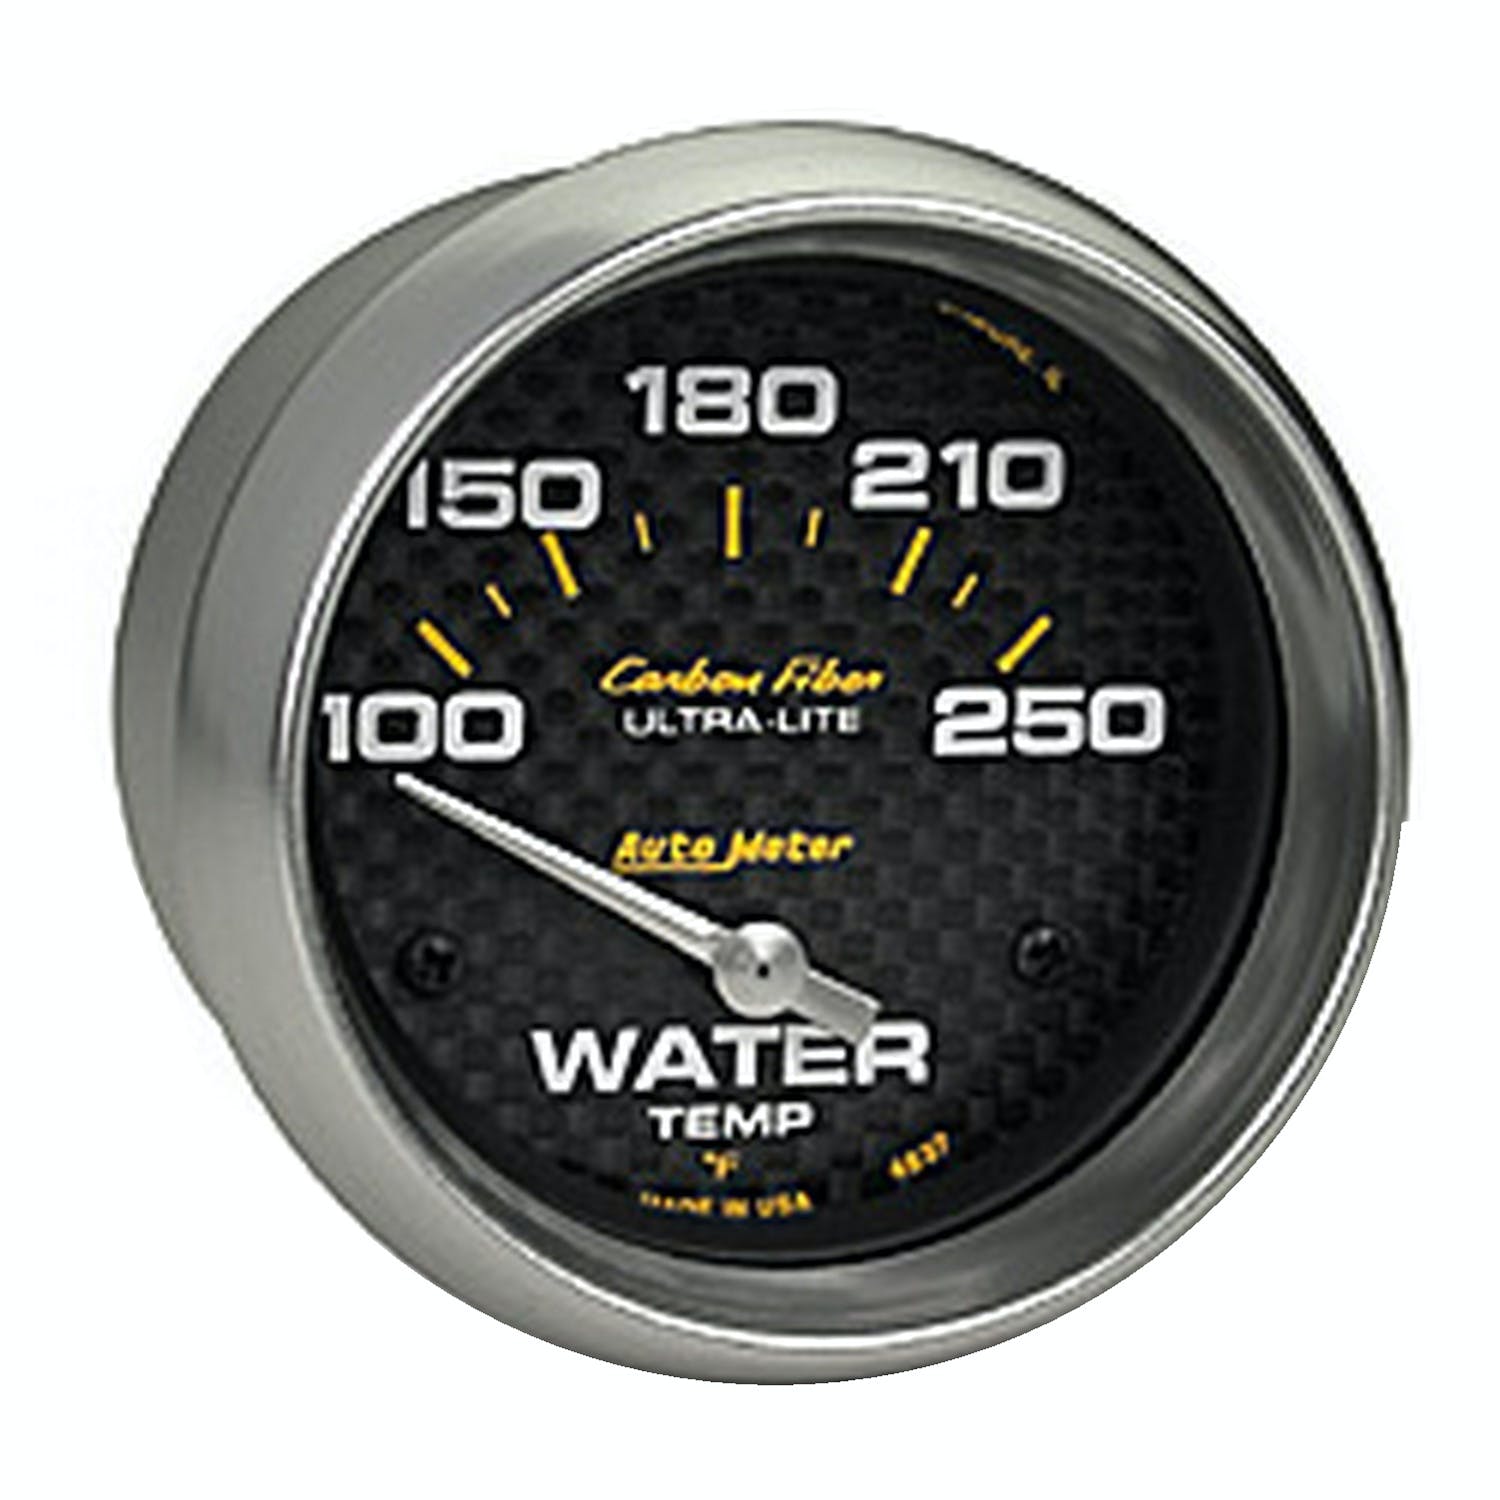 AutoMeter Products 4837 Water Temp 100-250 F